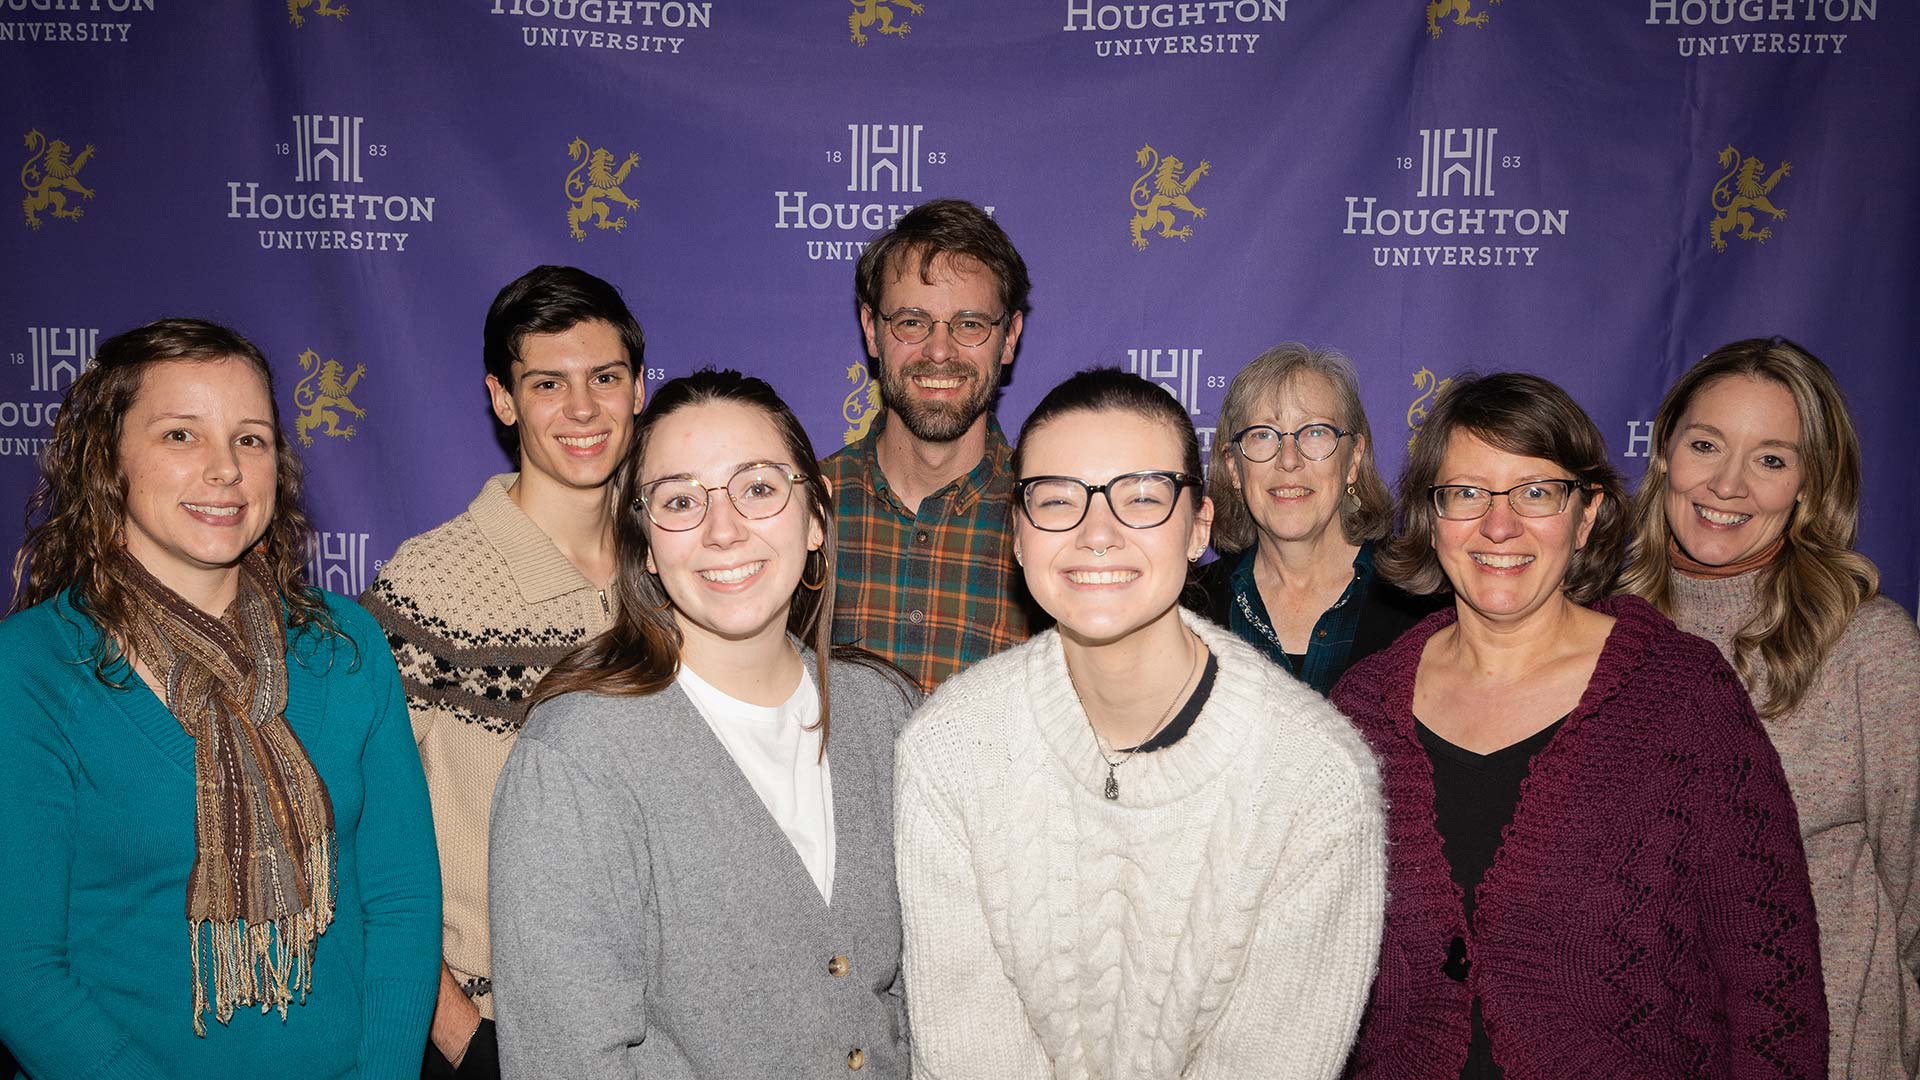 Houghton University's December graduates, along with some faculty and staff, smile for the camera in front of a Houghton banner